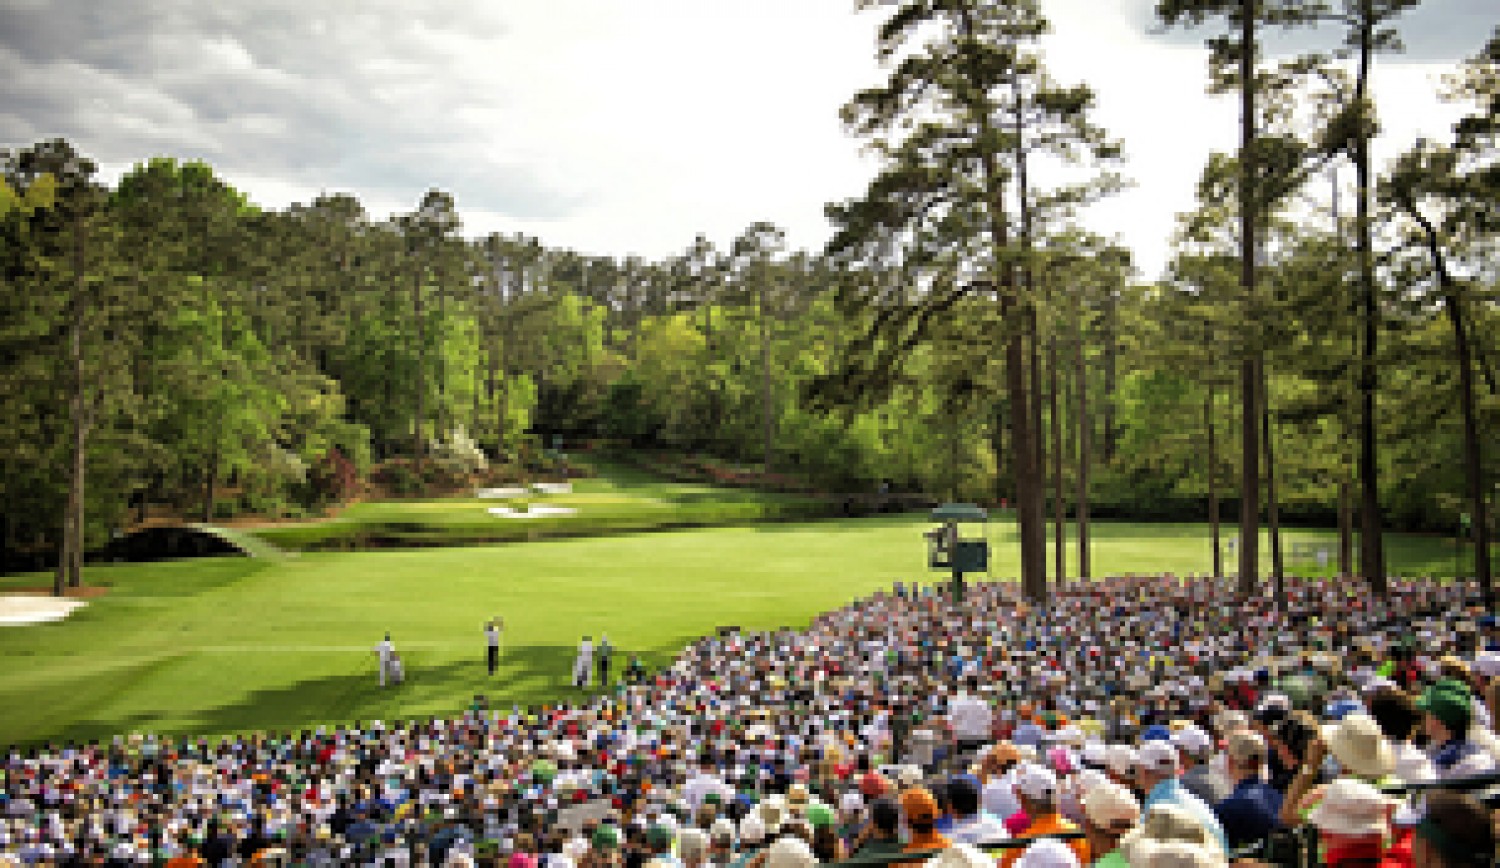 Masters could have its smallest field since 2002